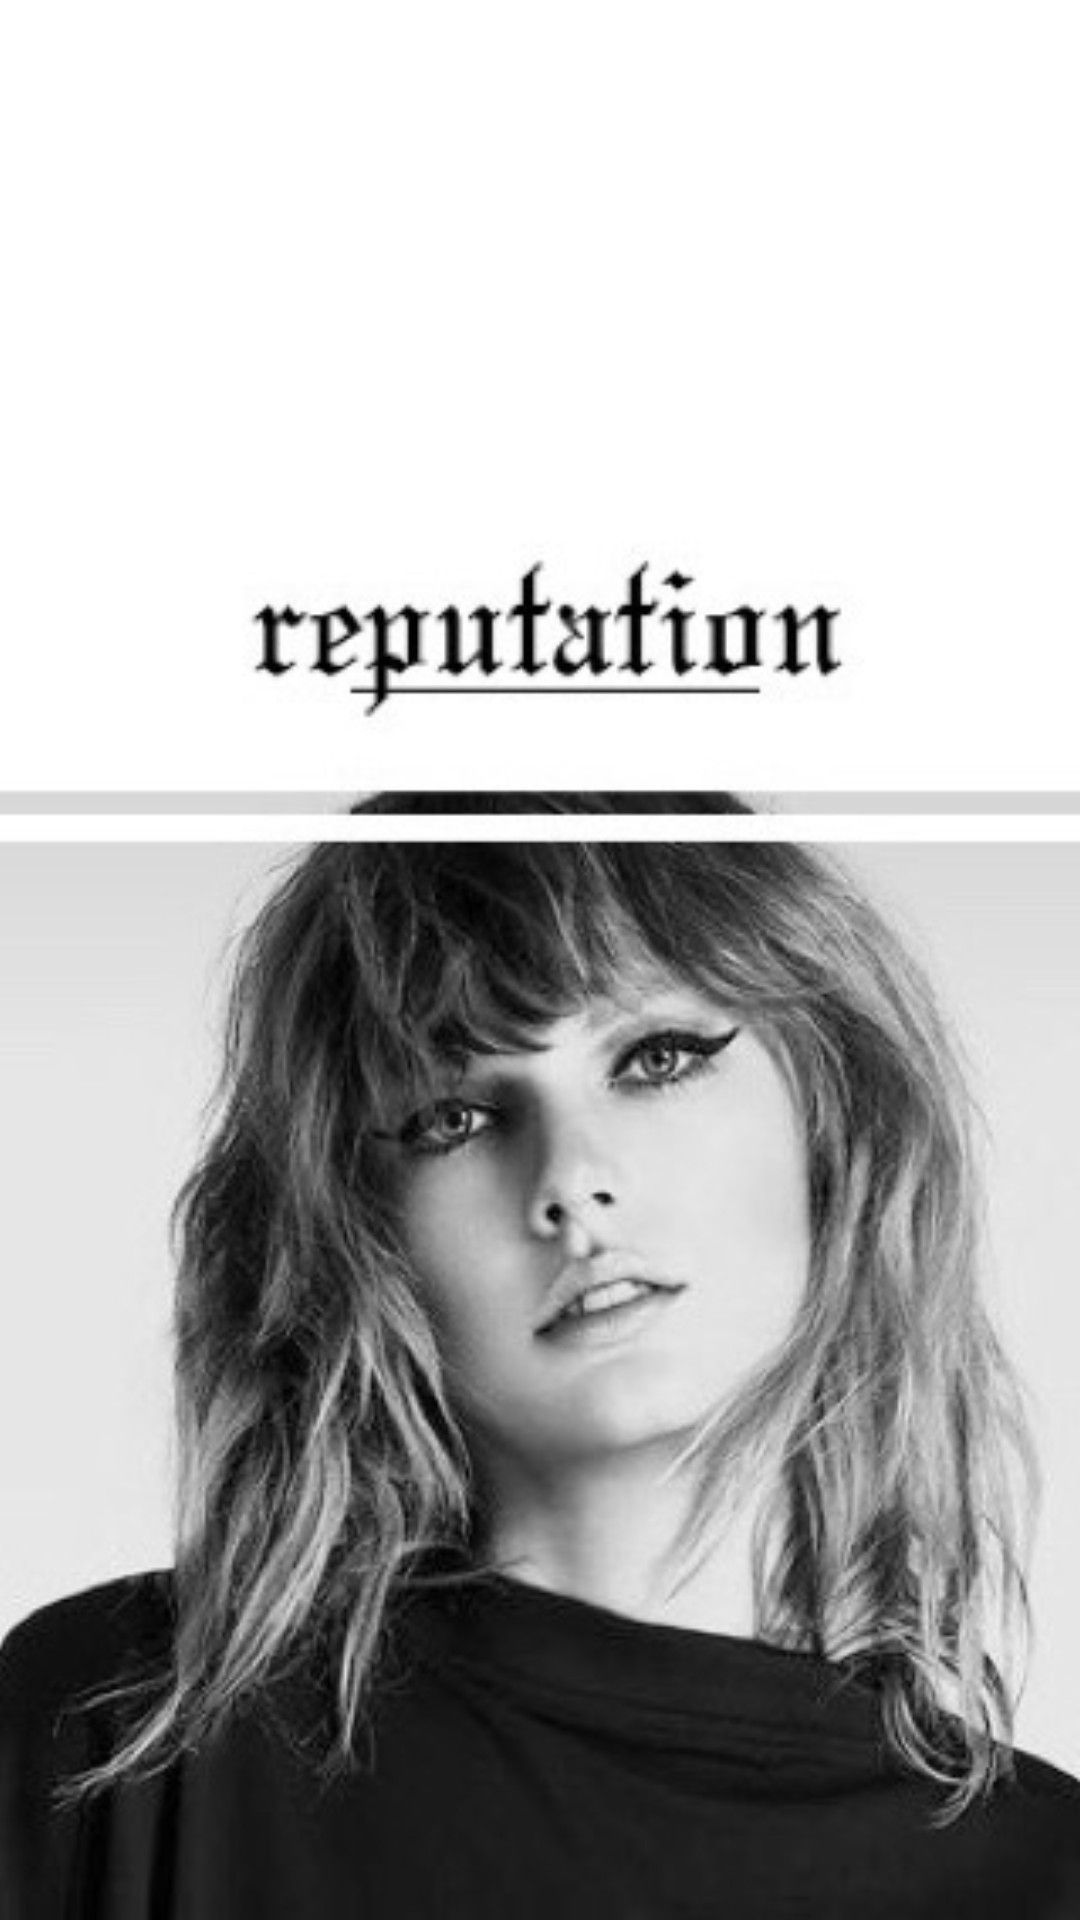 taylor swift iphone wallpaper,hair,face,white,hairstyle,text